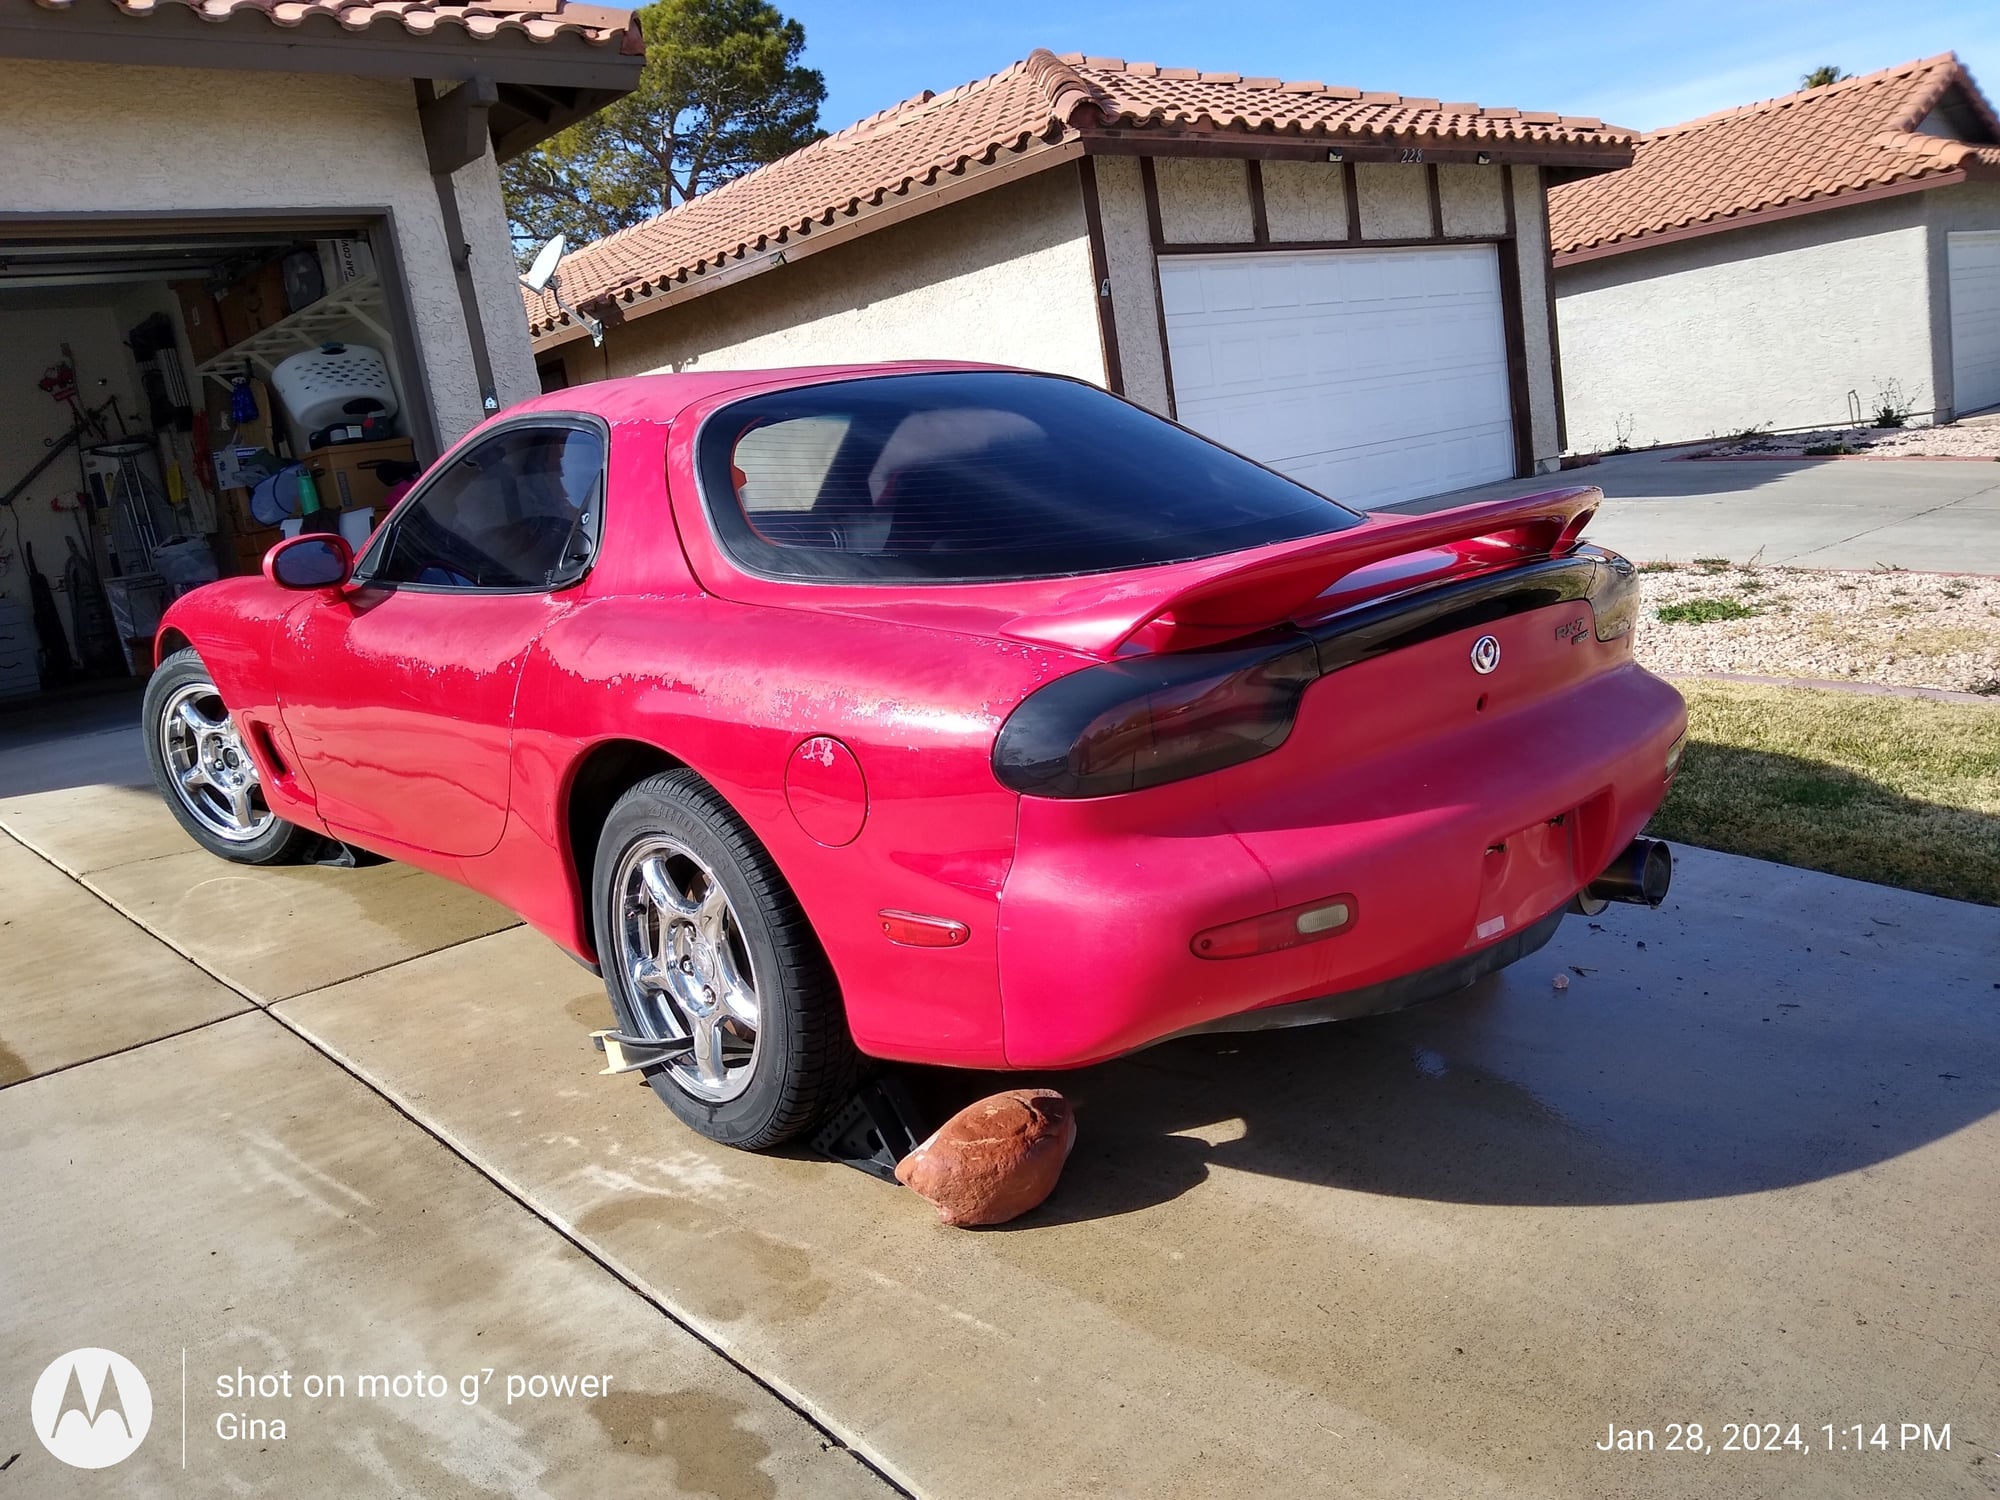 1994 Mazda RX-7 - 1994 Red Mazda Rx7 FD R2 Clean Title (not running) - Used - VIN JM1FD3339R0301398 - 174,028 Miles - Other - Manual - Coupe - Red - Las Vegas, NV 89145, United States